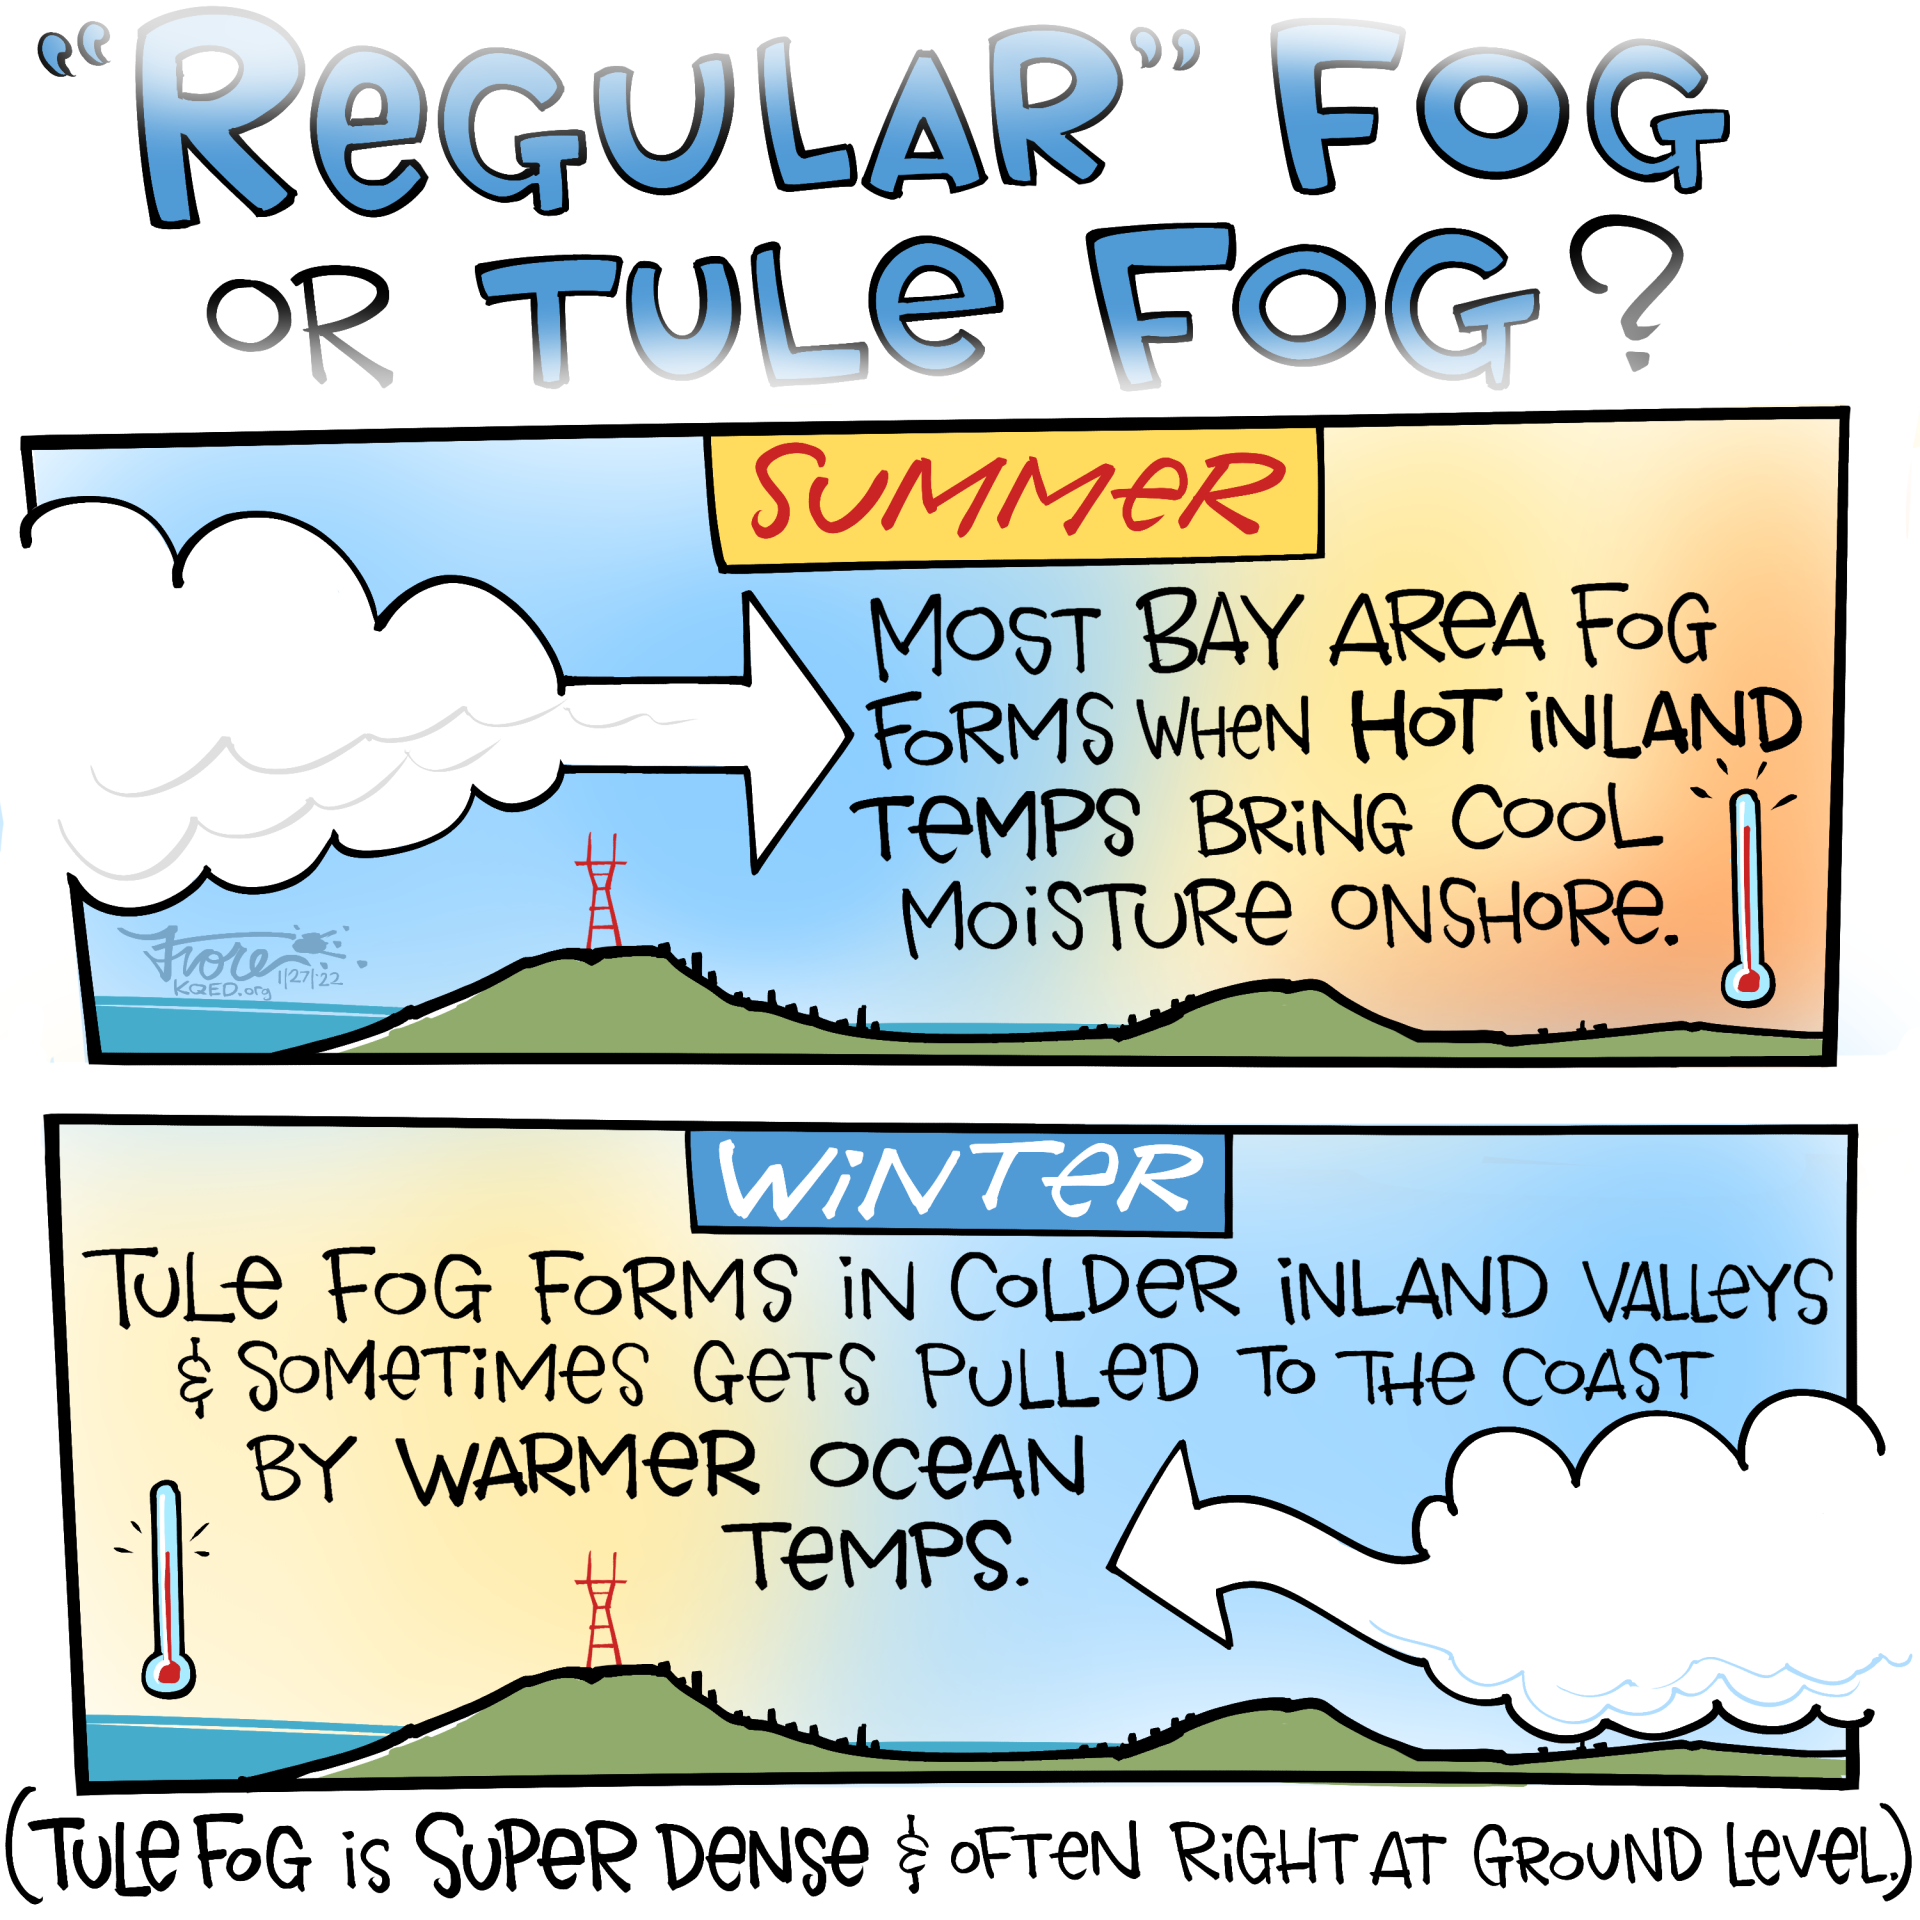 Cartoon: "Regular" fog or tule fog? Summer fog flowing over Sutro tower. Text reads, "most bay area fog forms when hot inland temps bring cool moisture onshore." Second panel: fog flows from the valley towards the ocean. "Tule fog forms in colder inland valleys and sometimes gets pulled to the warmer coast."